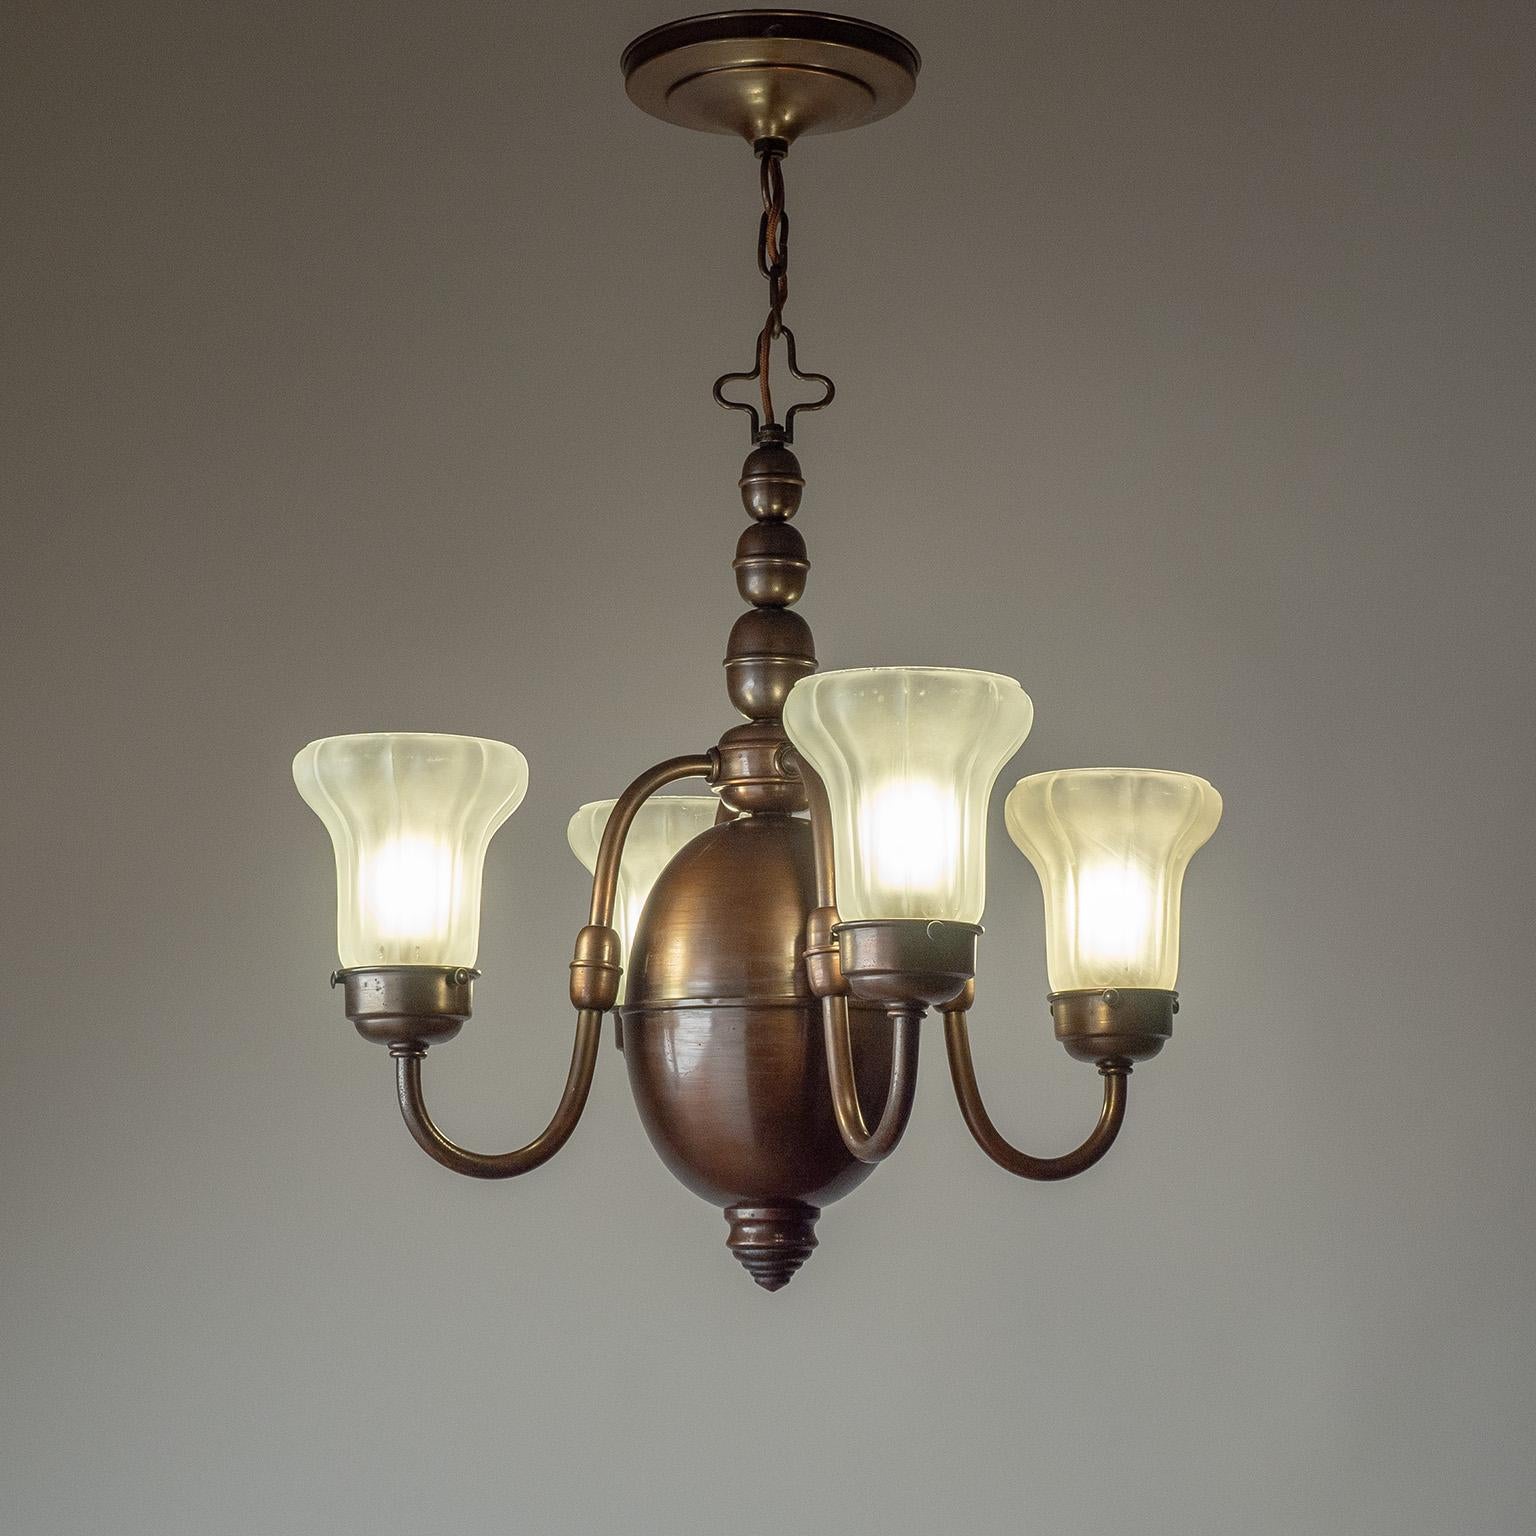 Swedish Copper and Glass Chandelier, 1930s For Sale 4